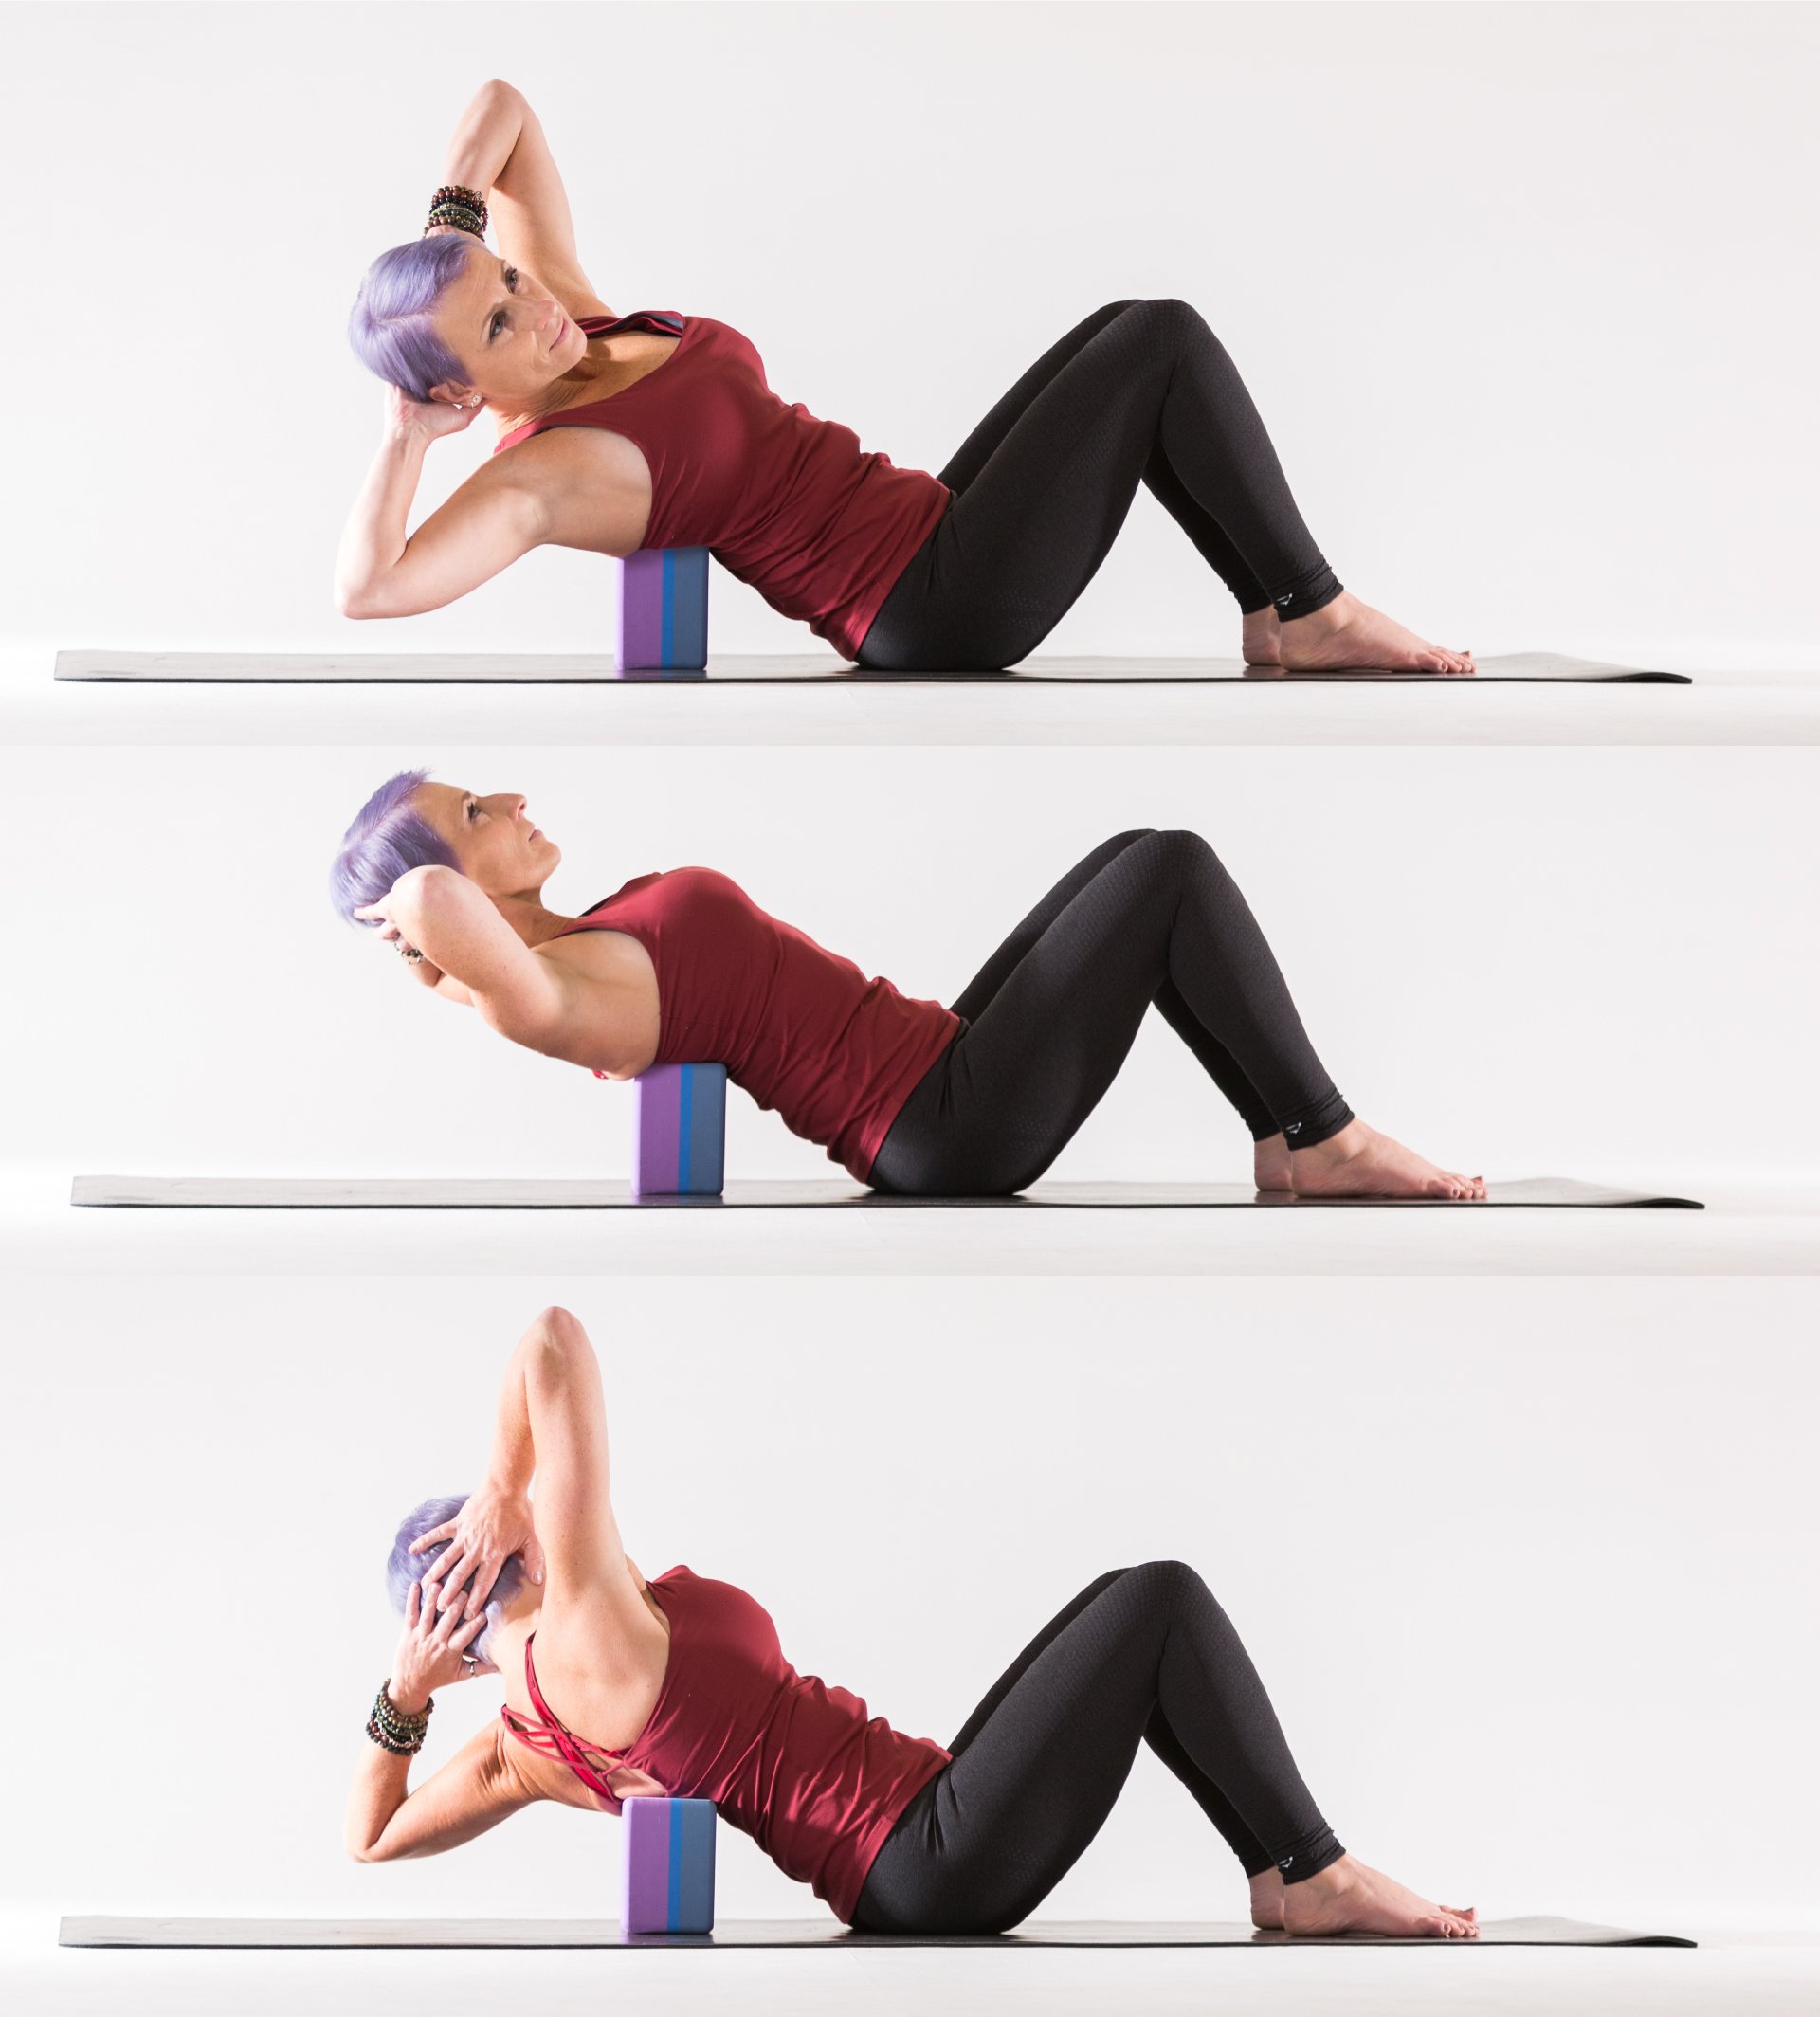 Elevate your heart rate with the Single Leg Stretch! Lie on your back, hug  one knee to your chest while extending the other leg straight, and switch  in